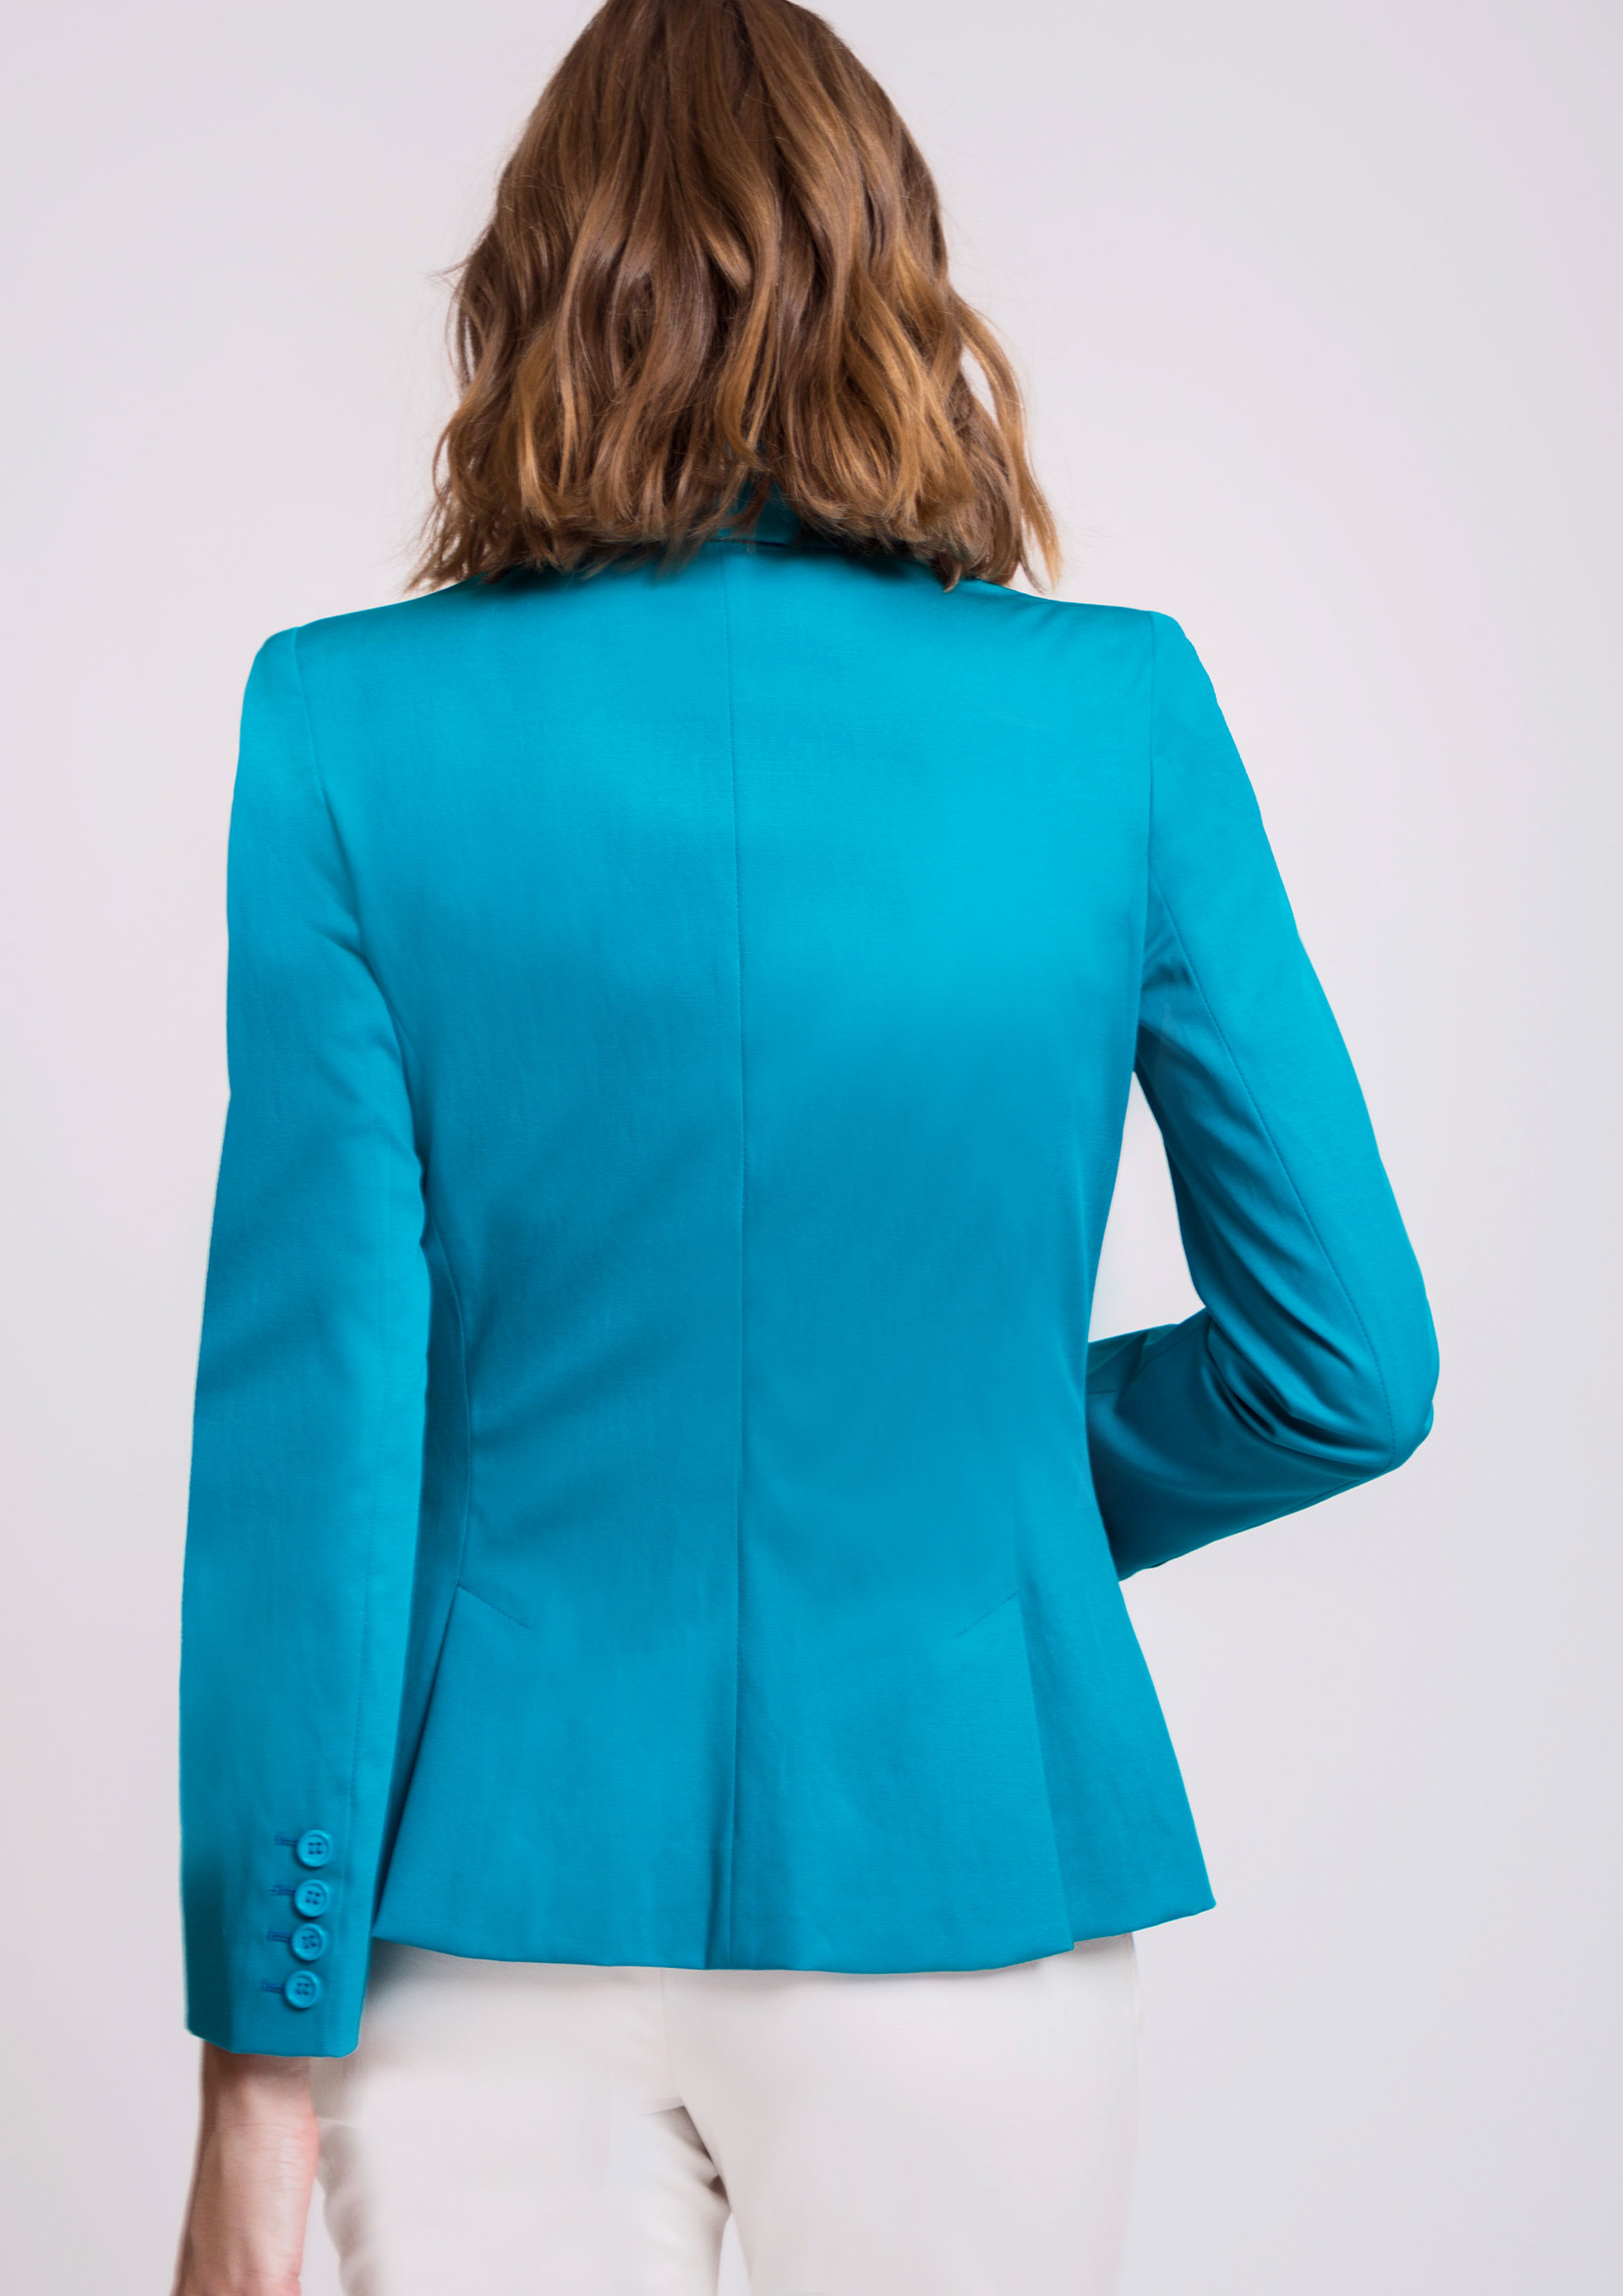 Fitted turquoise blazer